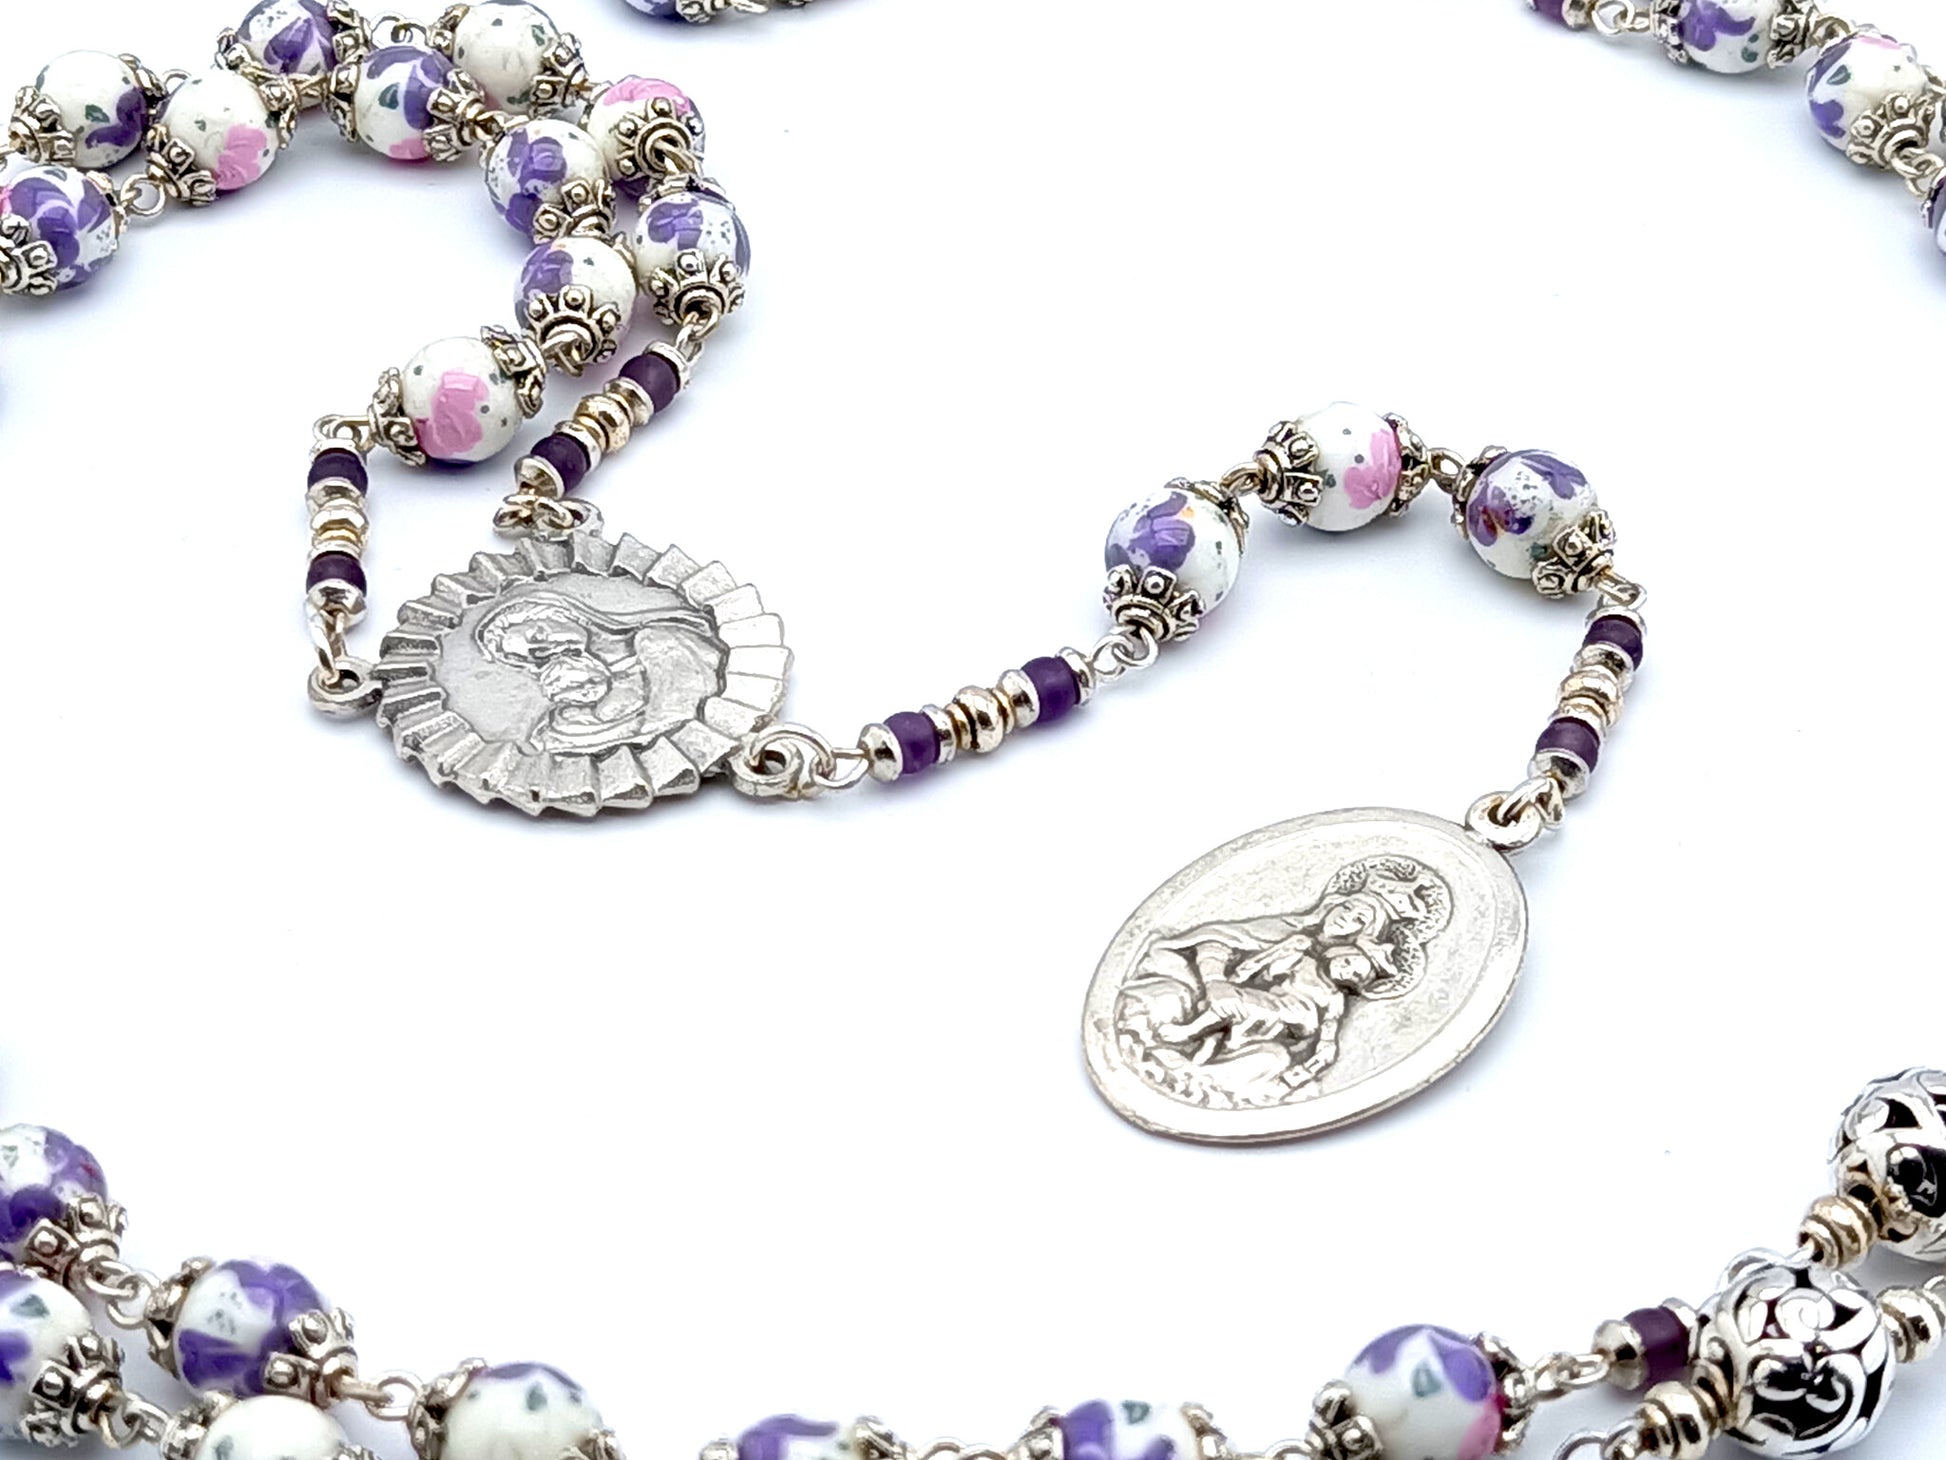 Our Lady of Sorrows unique rosary beads dolor rosary with porcelain and silver beads silver Our Lady medals.